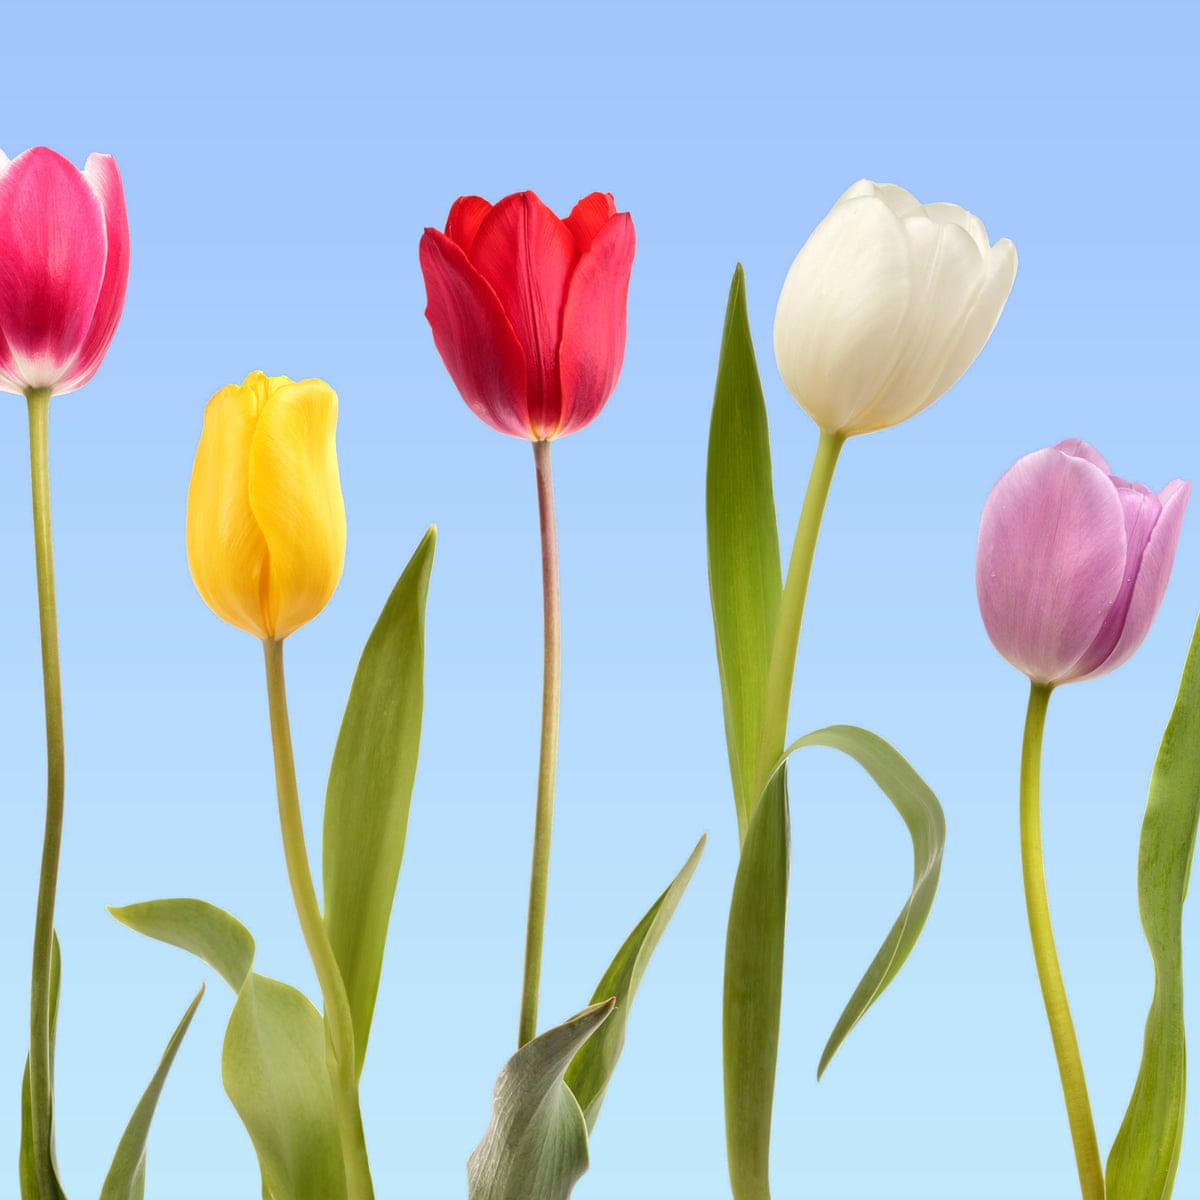 Tulips are a must for spring – but go sustainable to keep it ...